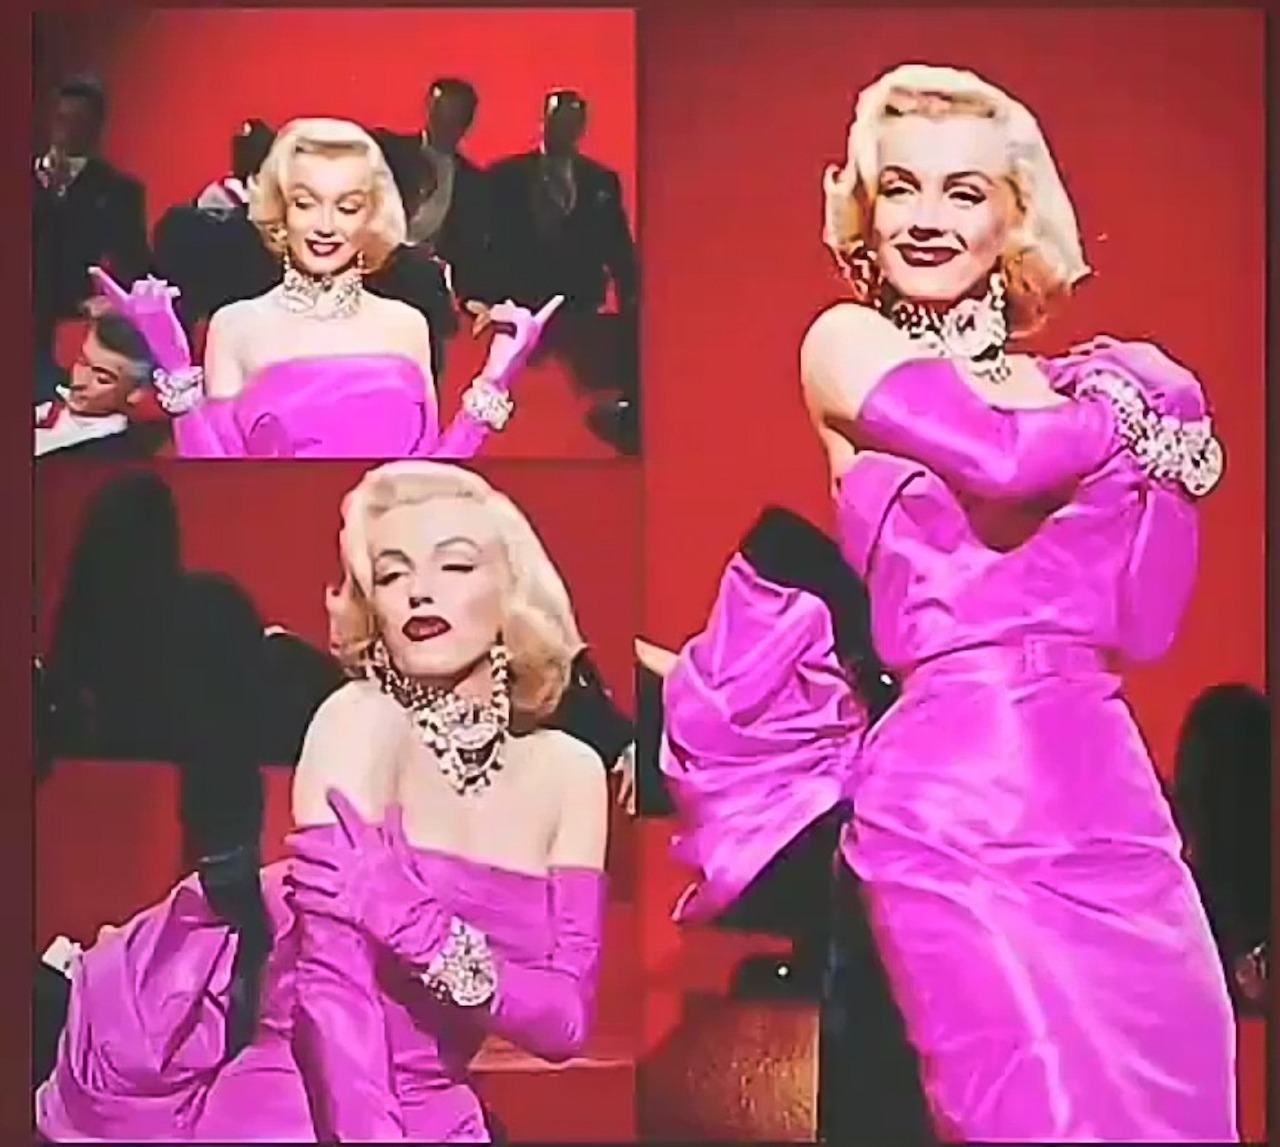 Marilyn Monroe performing to her iconic “Diamonds are a girl’s best friend” from the 1953 classic Gentlemen prefer Blondes.